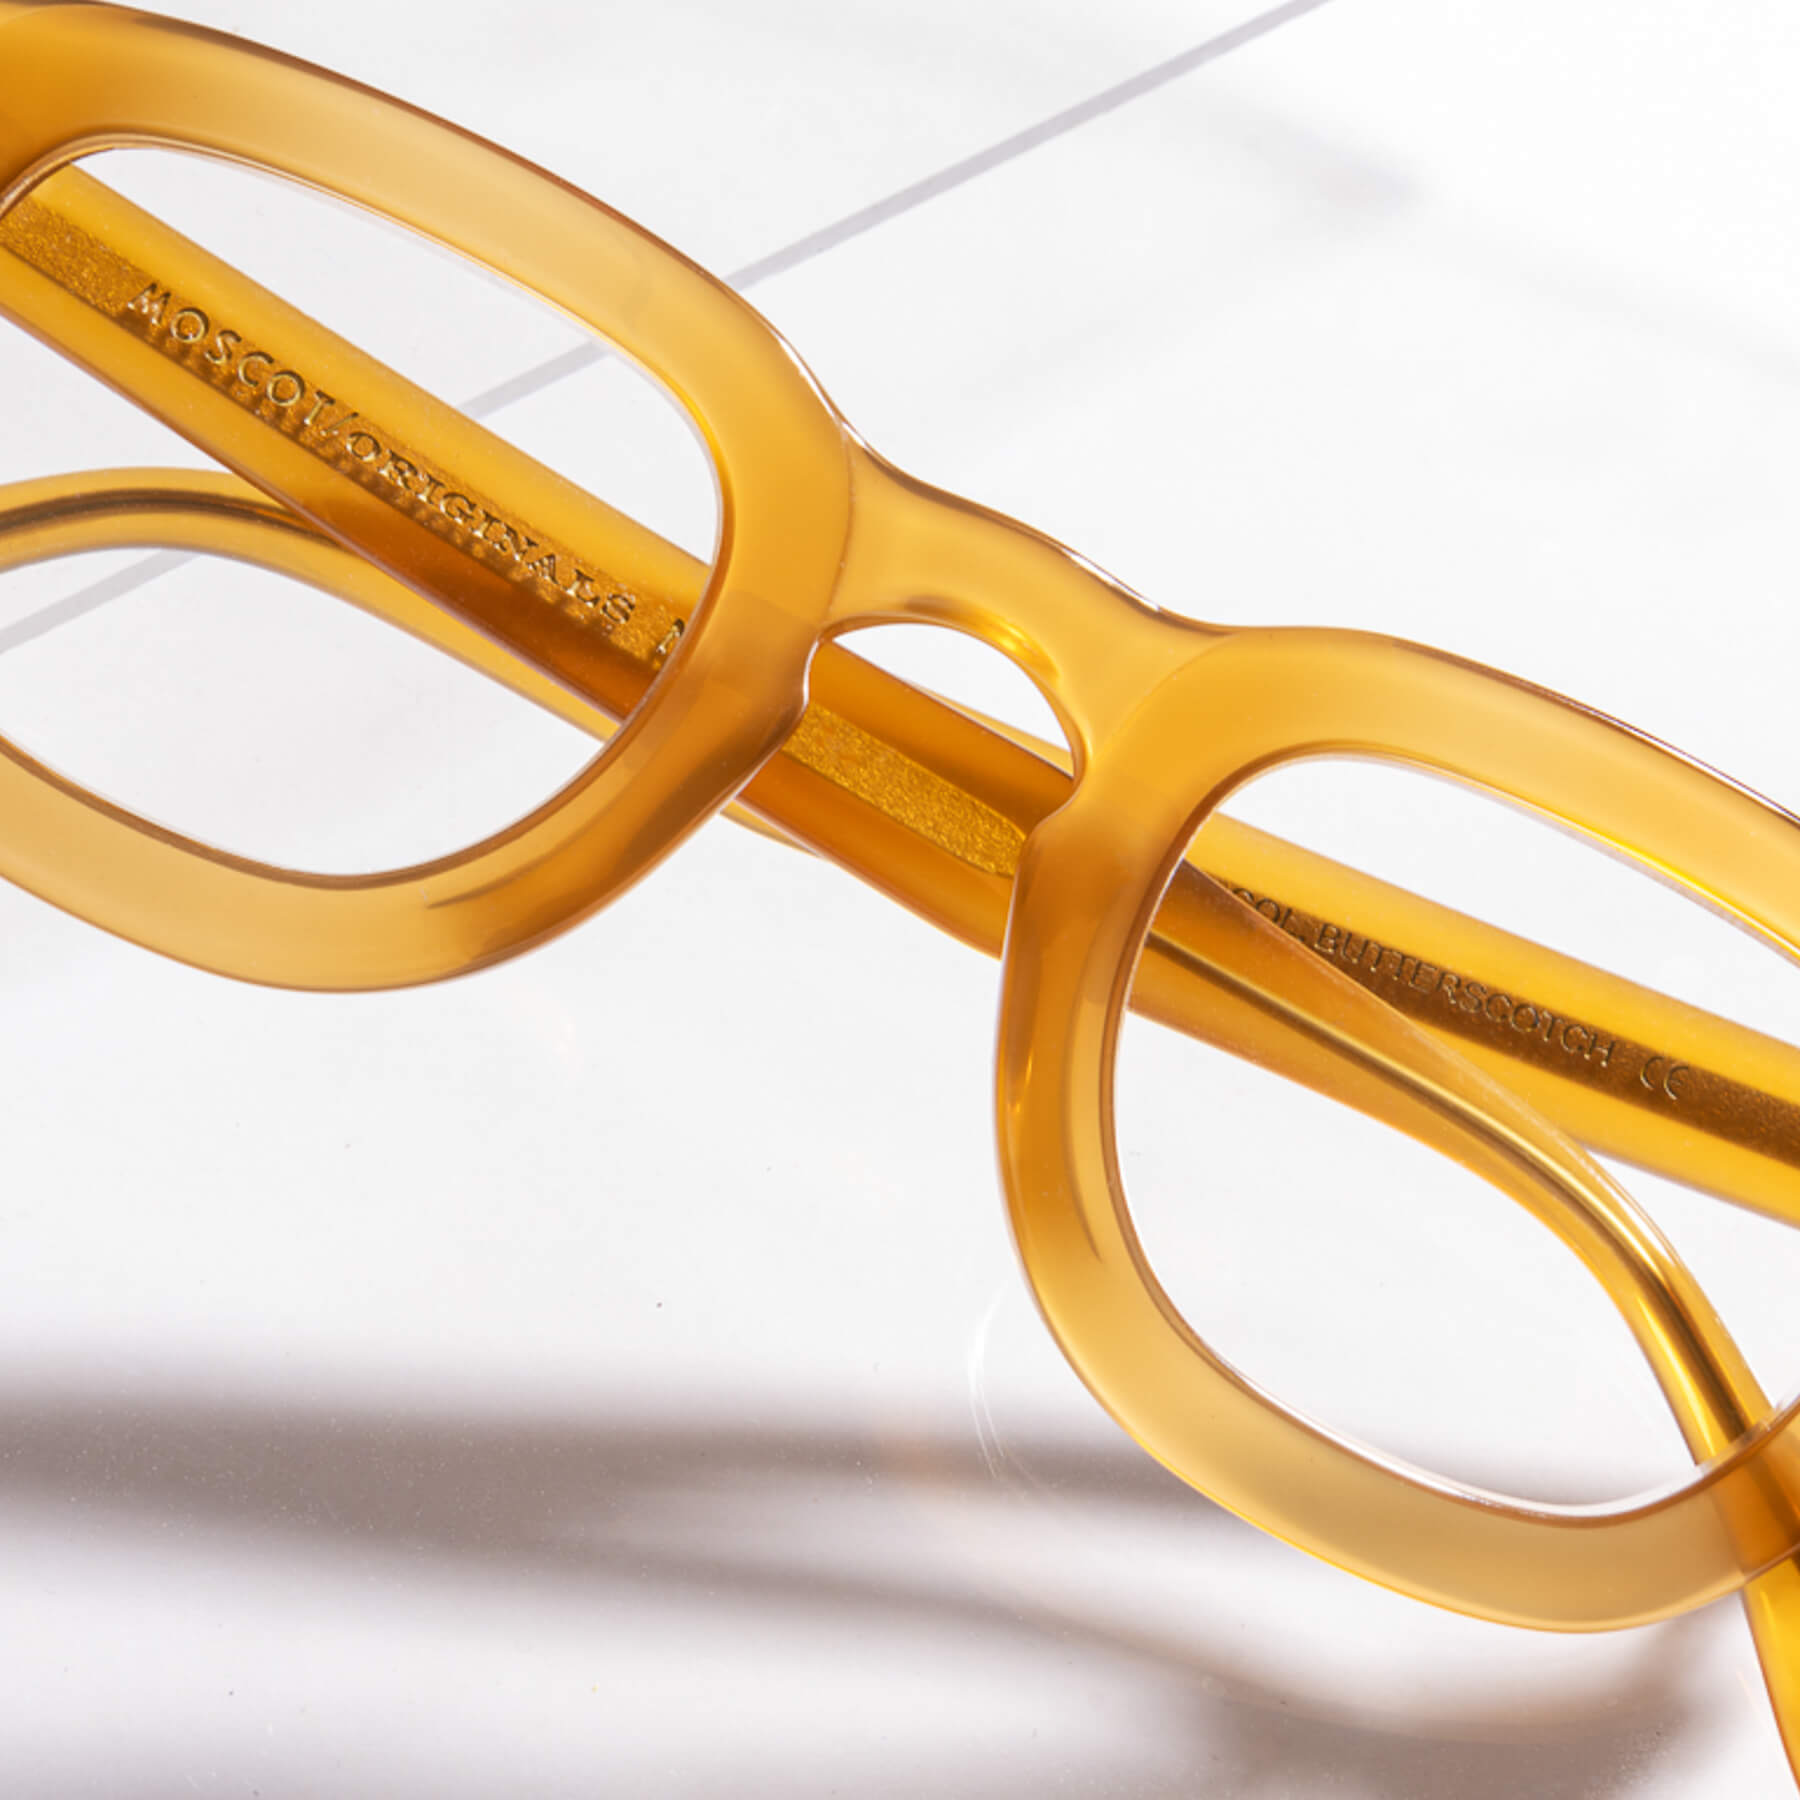 Customize your frames in three easy steps